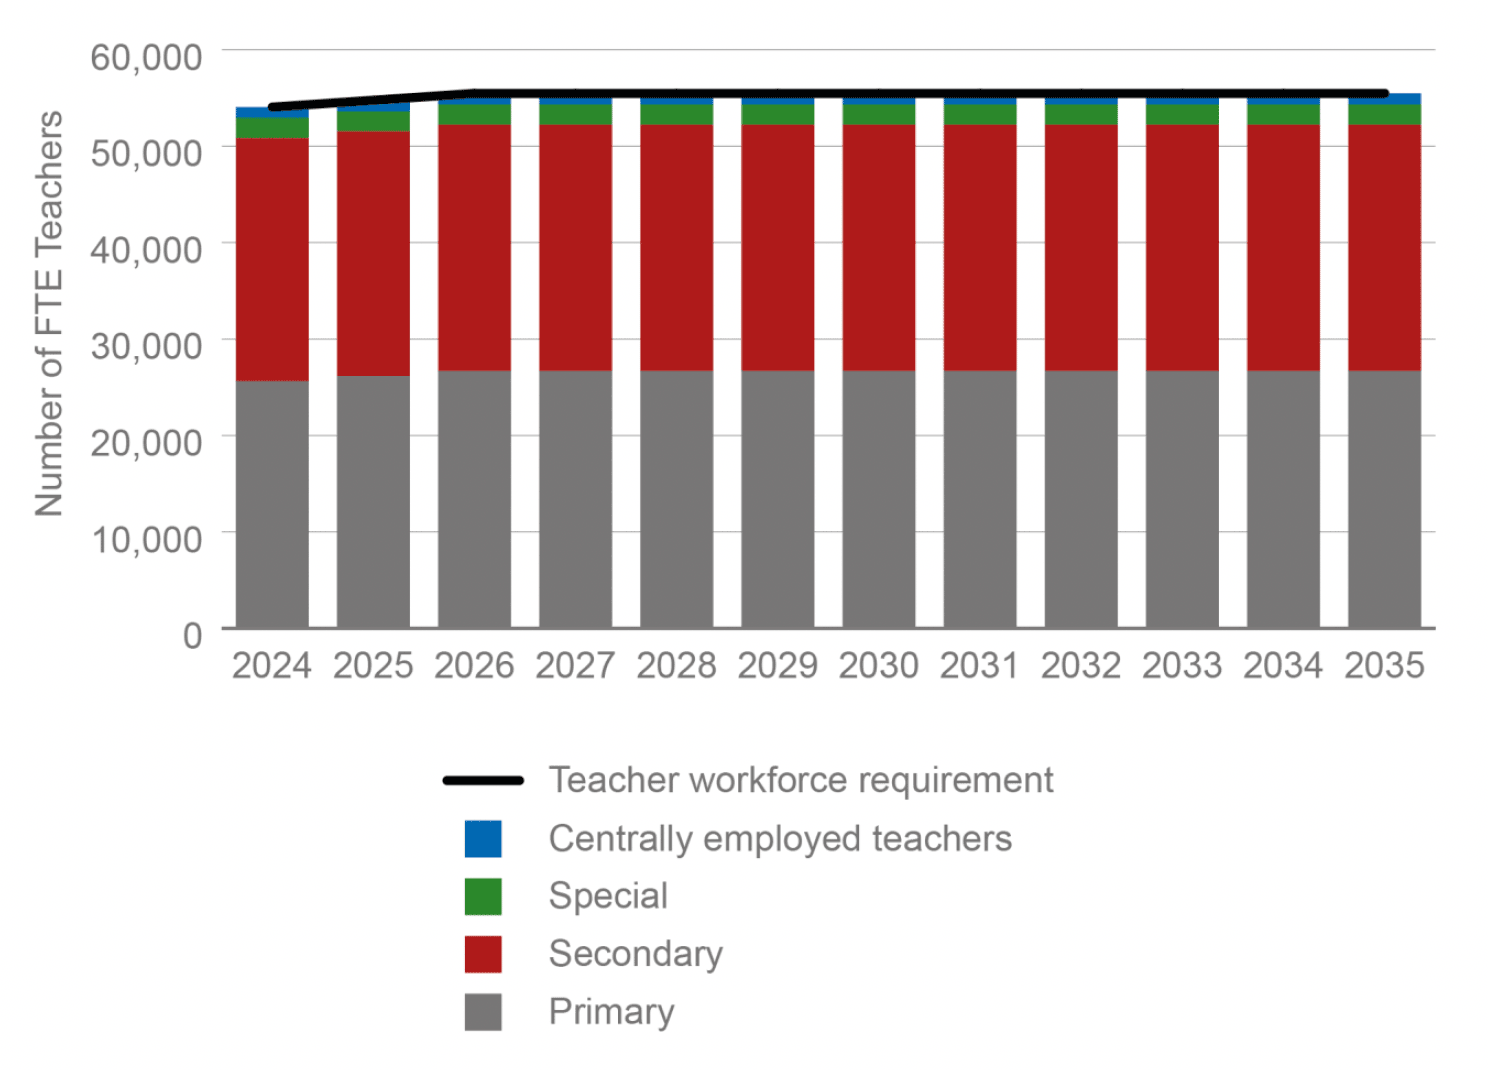 Combination chart with a line plot which shows how the commitment involves teacher numbers increasing until 2026, after which the stock levels off until 2035.